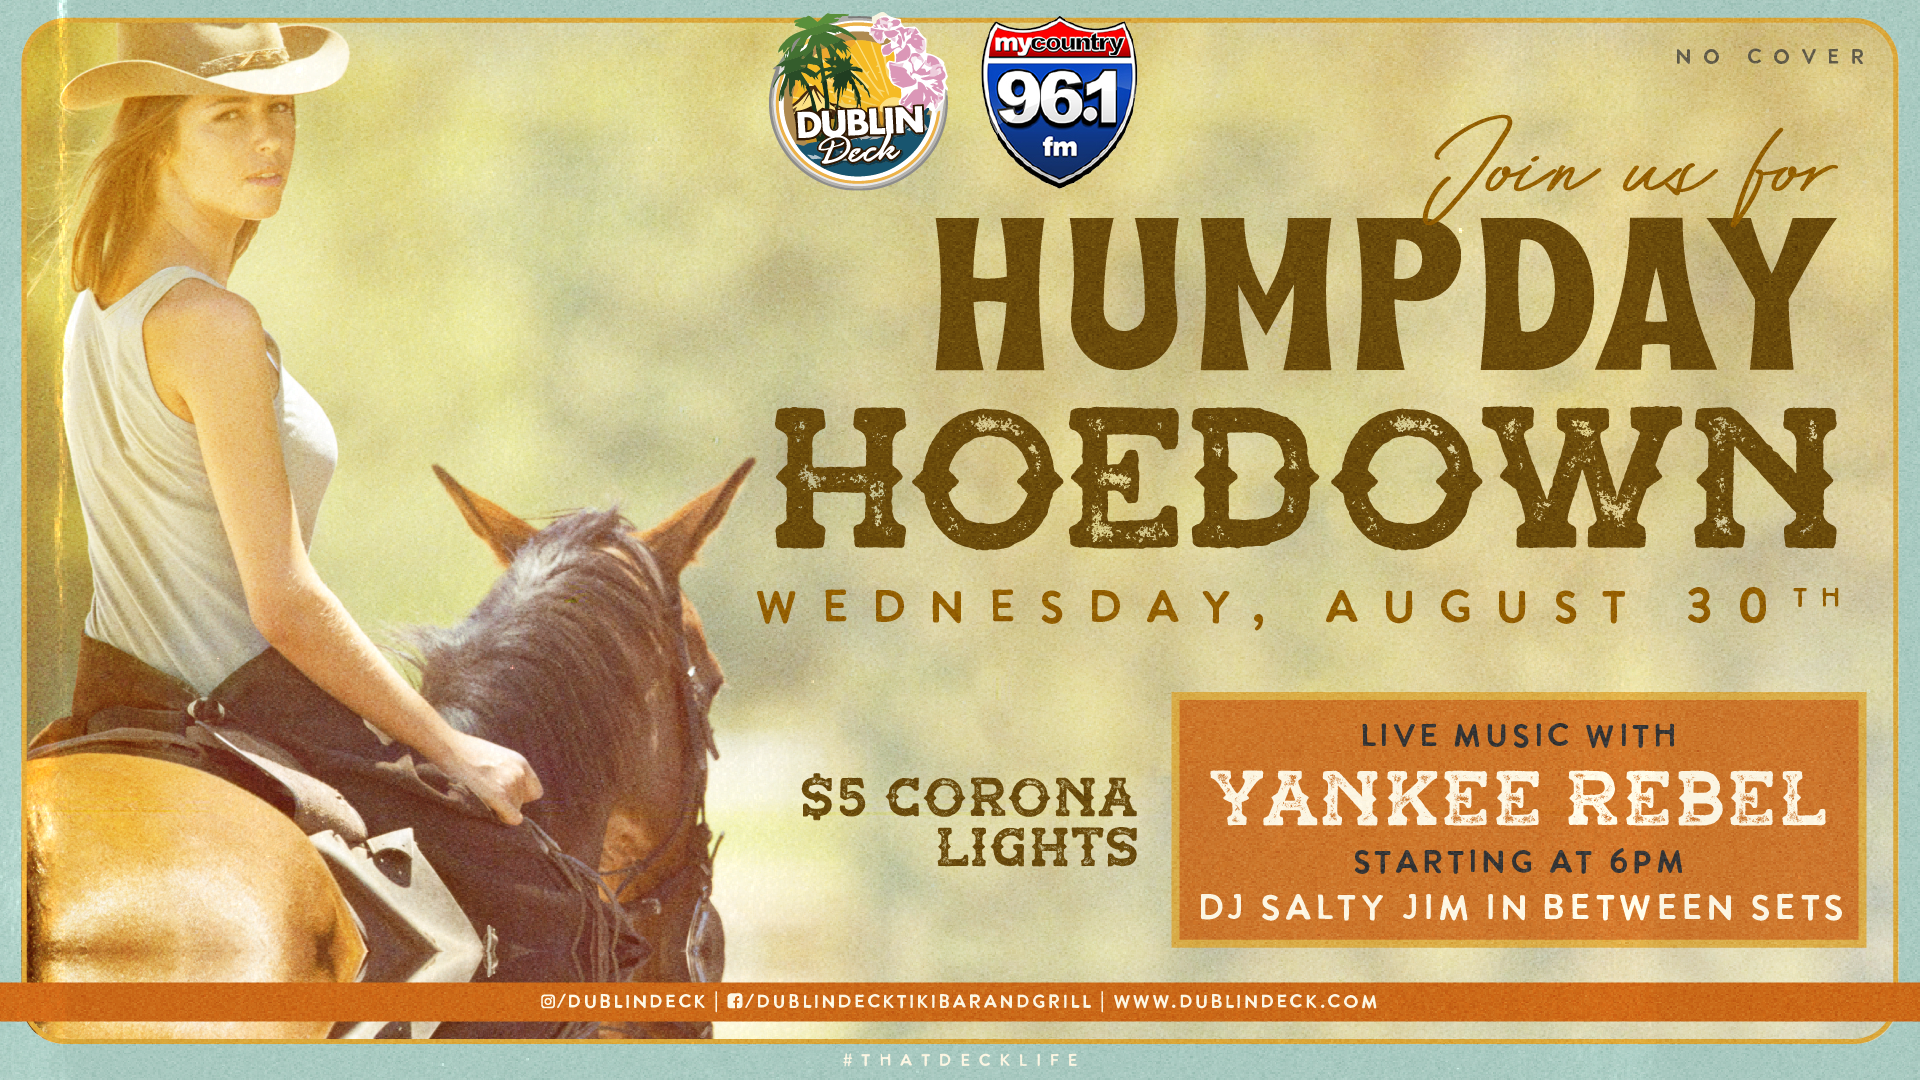 Saddle up for another Humpday Hoedown with Yankee Rebel! Music begins at 6PM